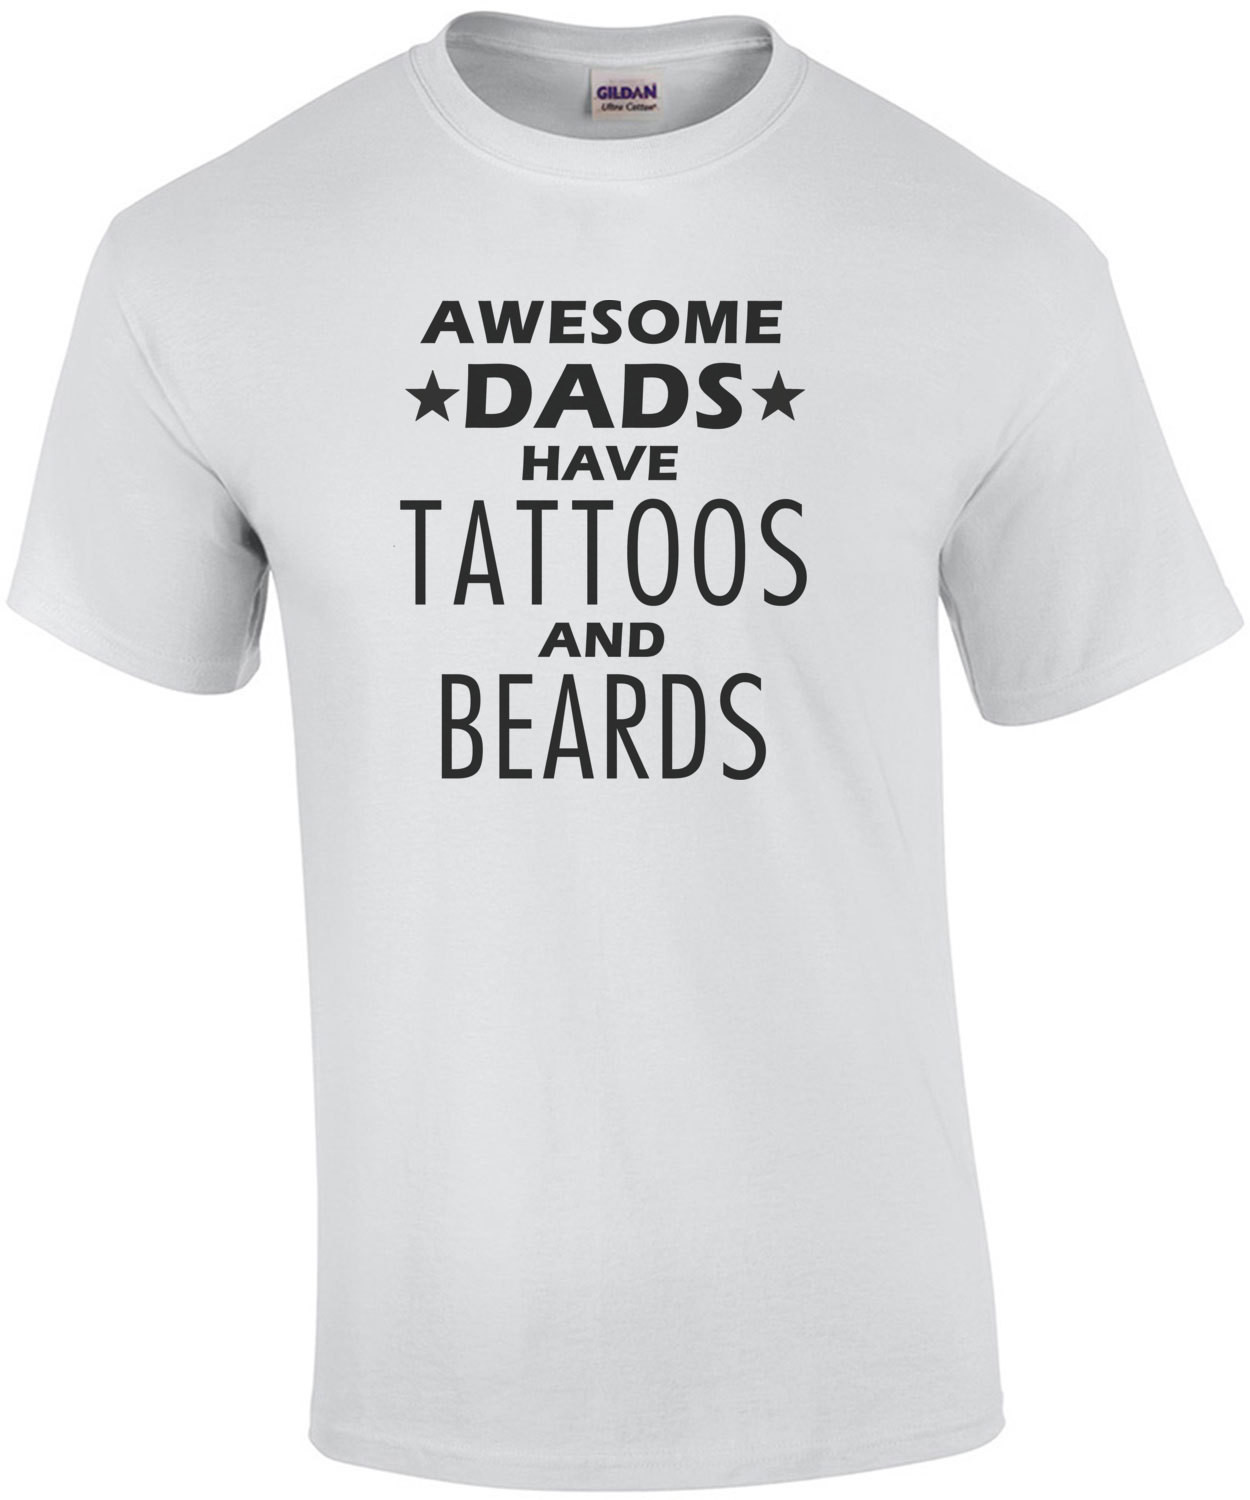 Awesome Dads have tattoos and beards - funny dad t-shirt - father's day t-shirt